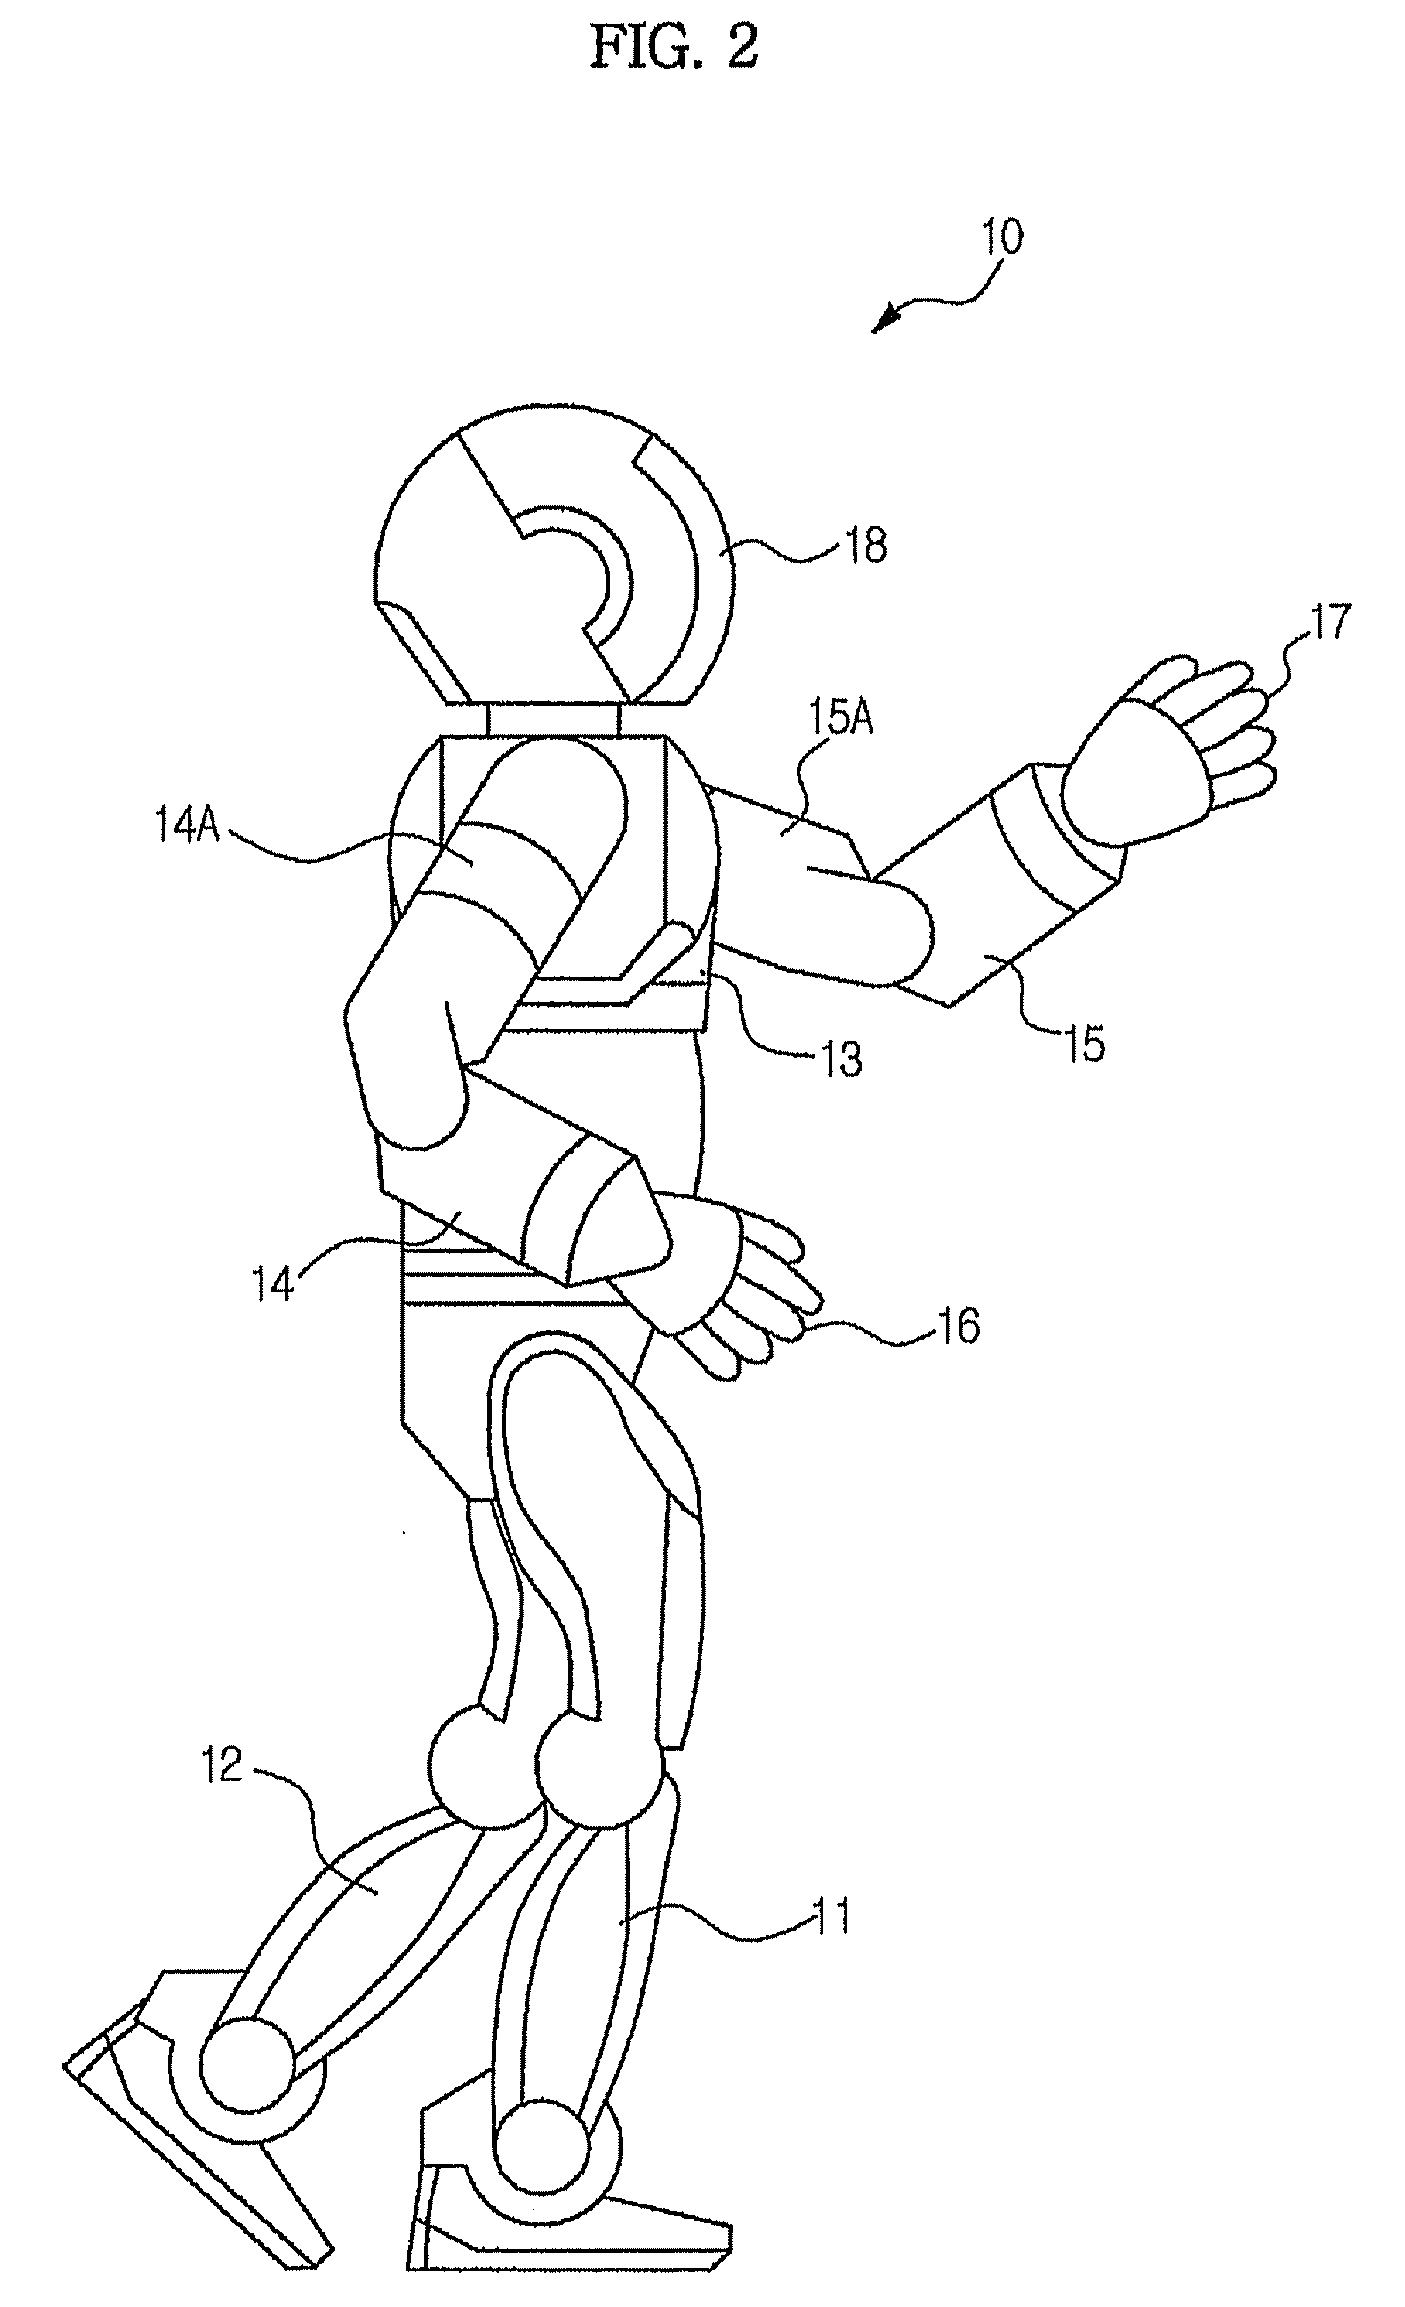 Robot and method of controlling cooperative work thereof